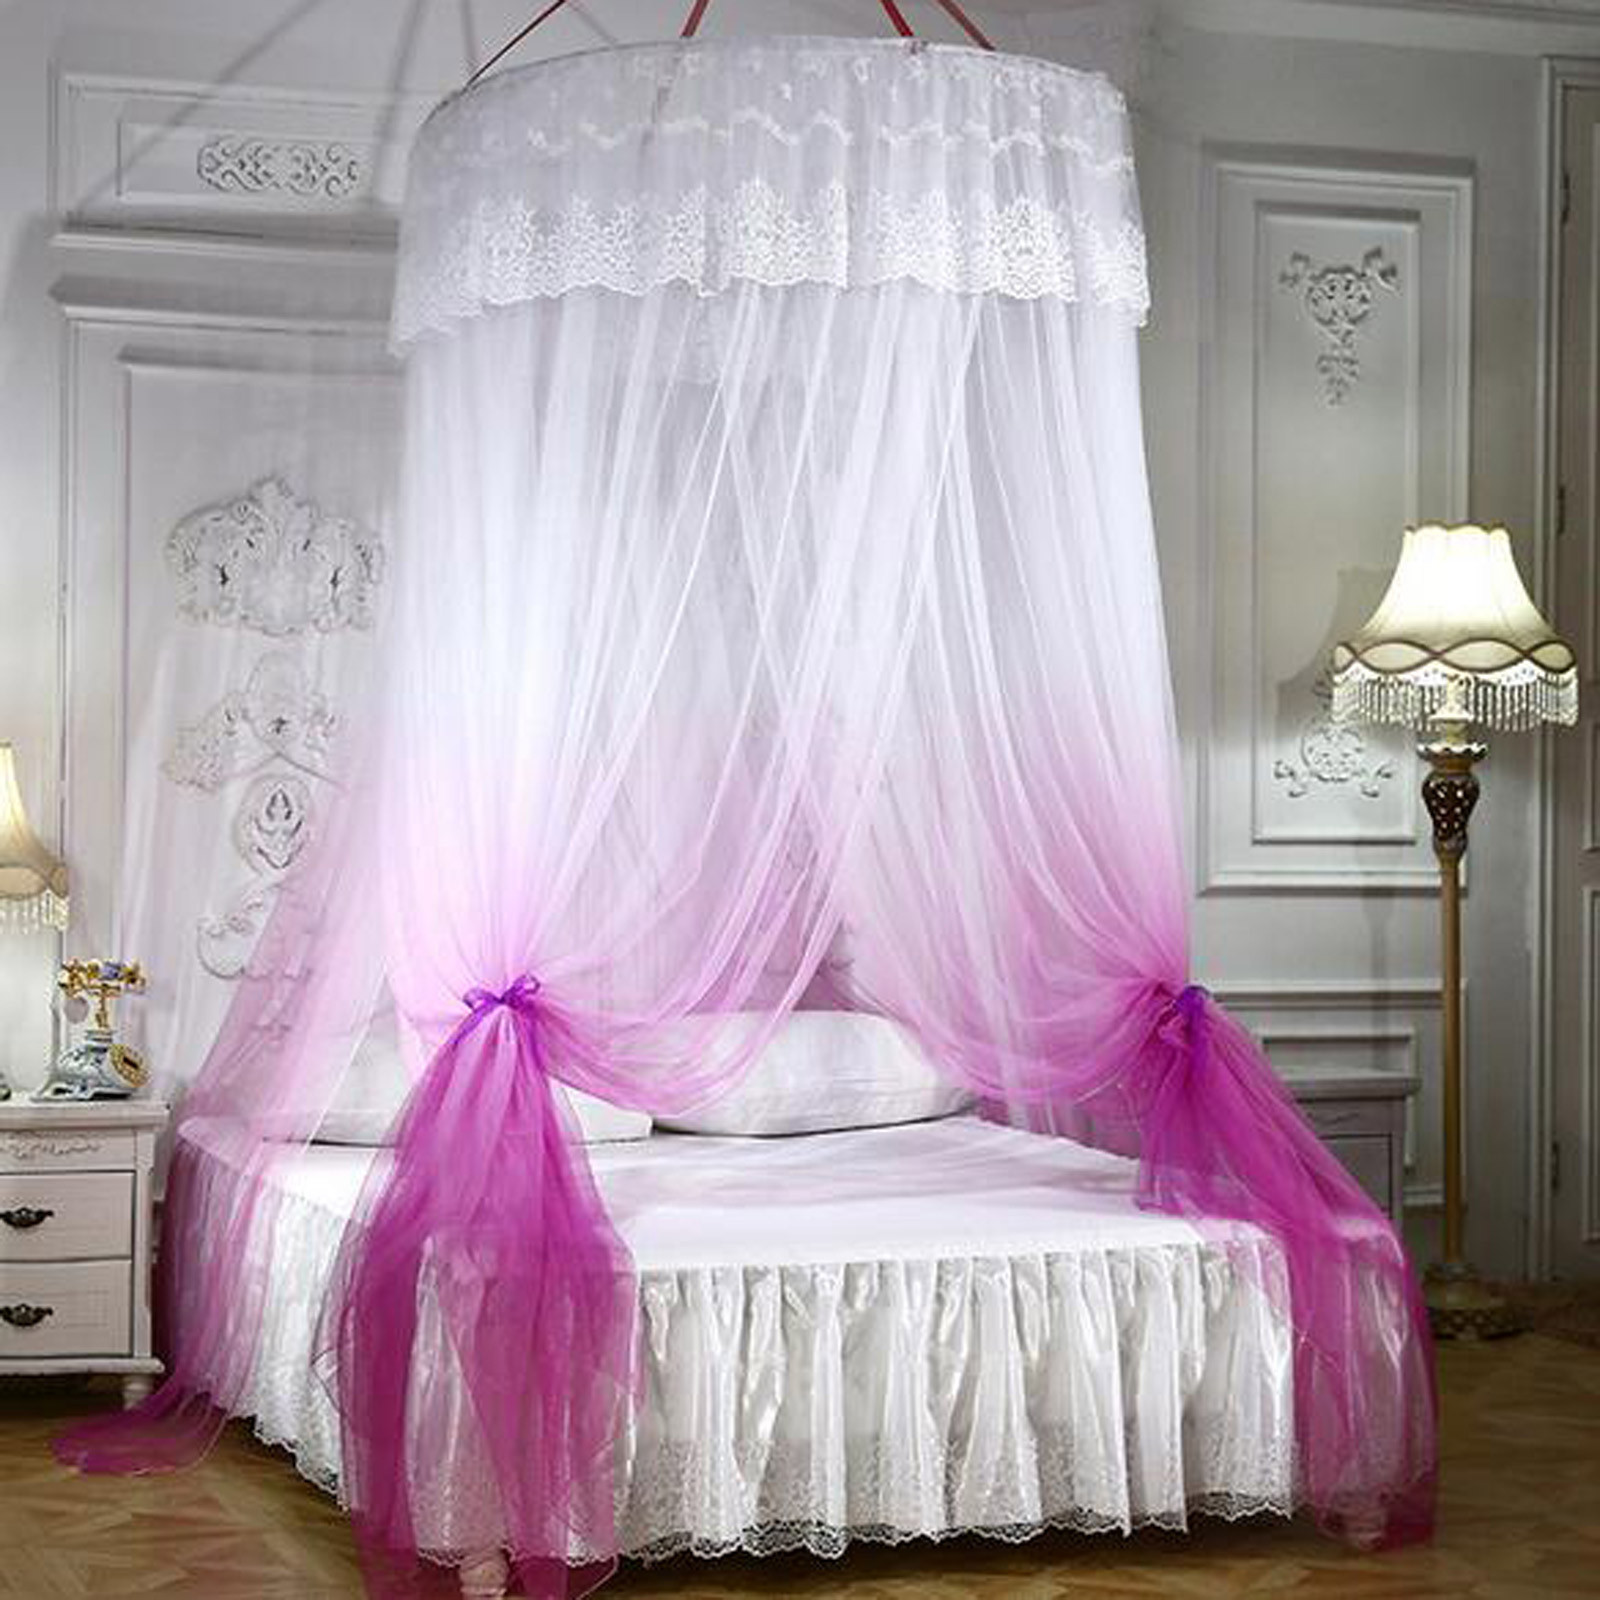 Children Elegant Dome Mosquito Net Canopy Lace Princess Style Mosquito Net Bed Curtain Netting Mosquito Net For Baby Sleeping